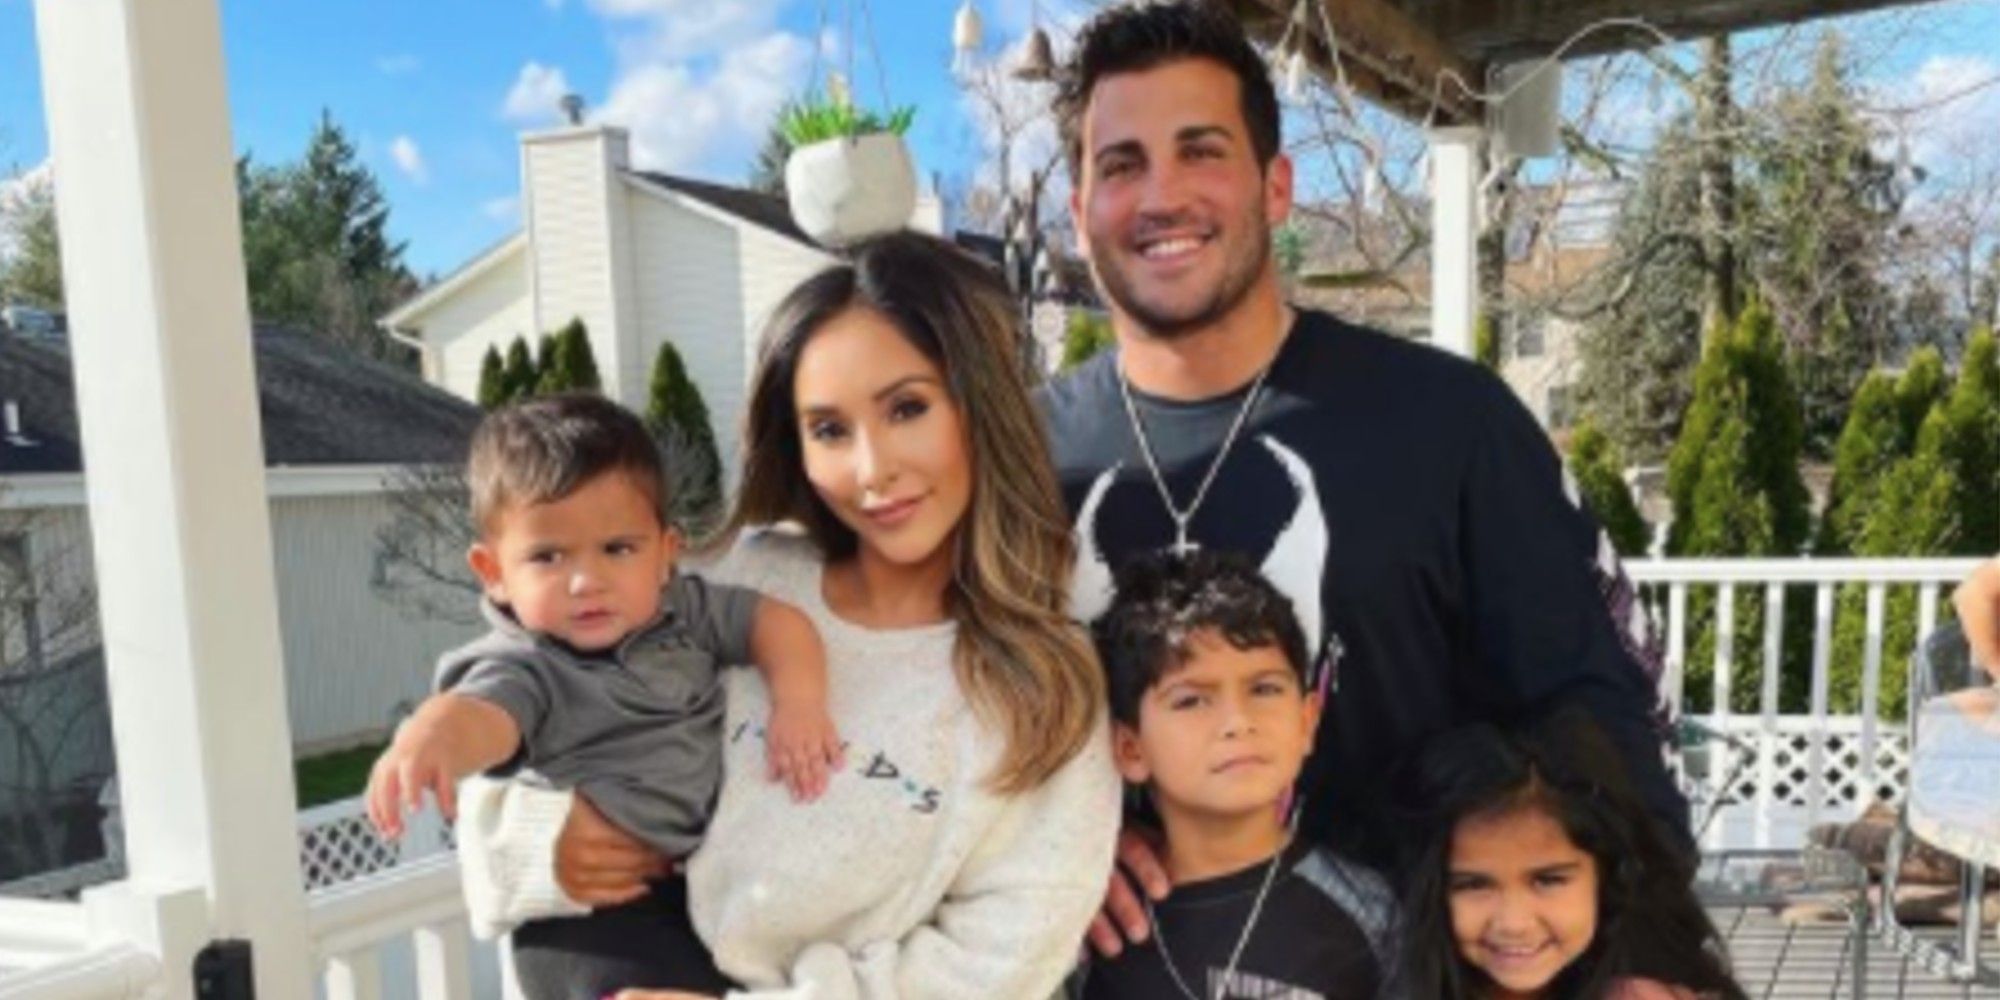 Jersey Shore star Snooki with husband and children